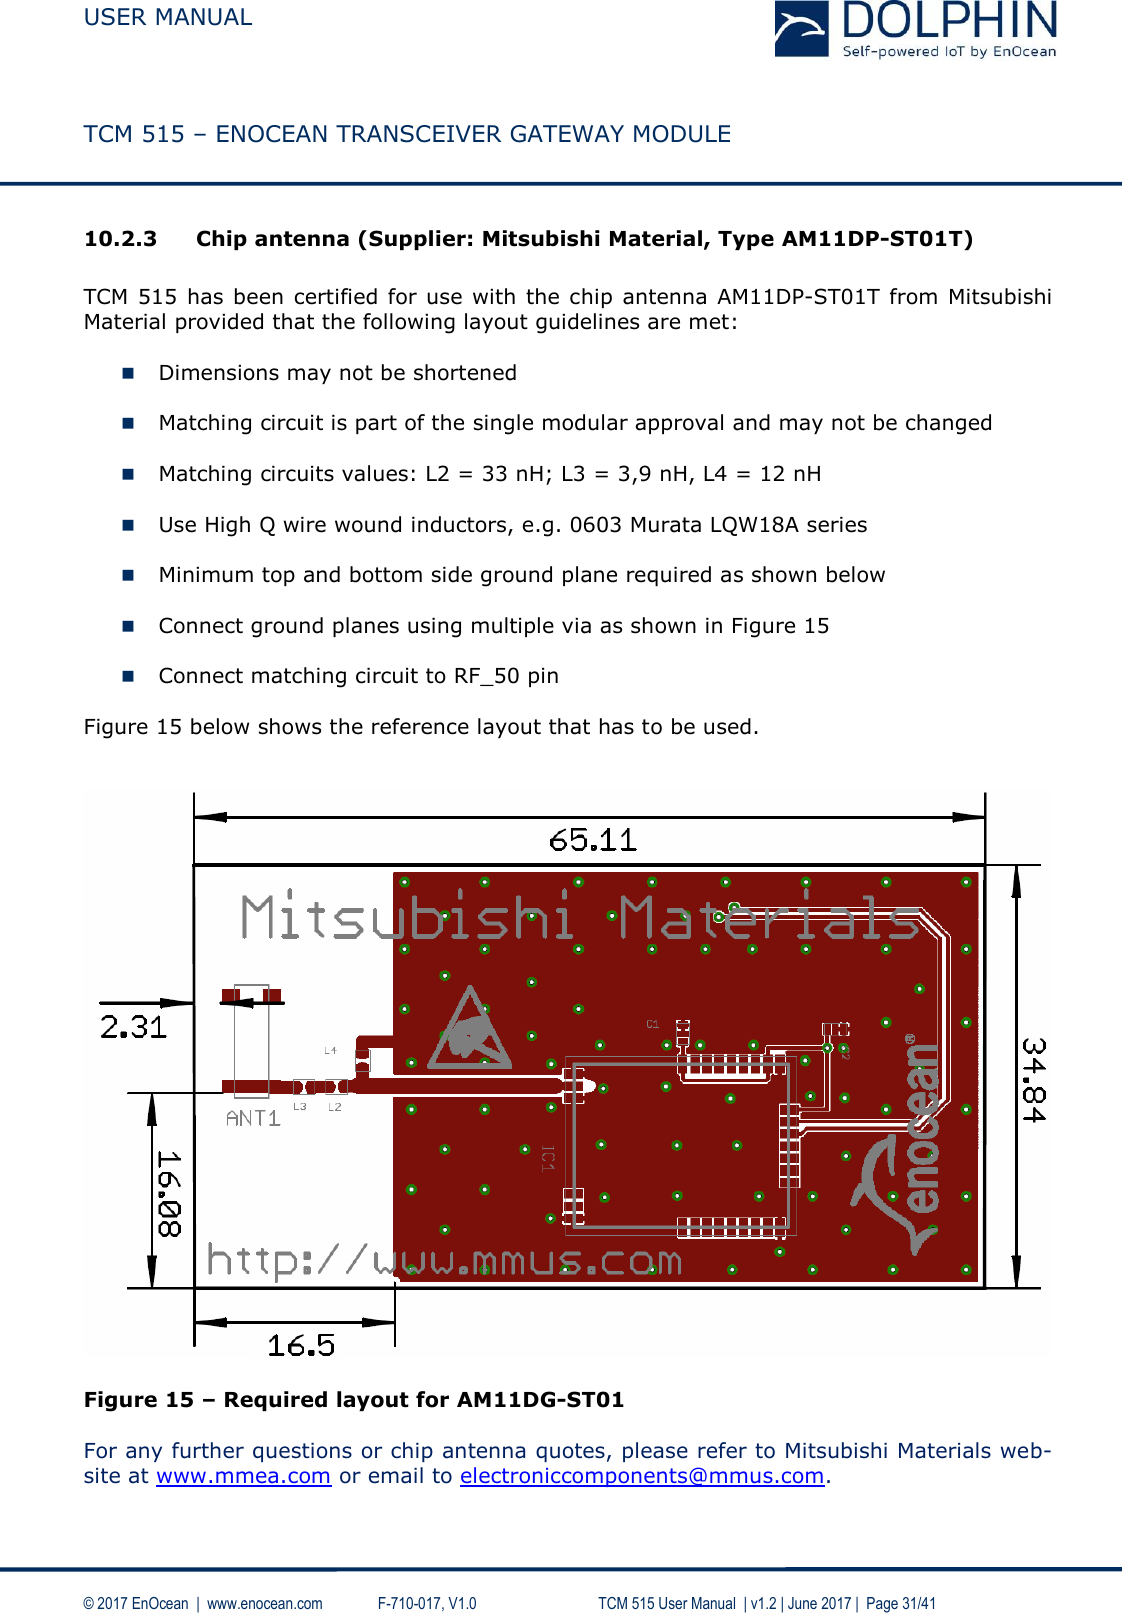  USER MANUAL    TCM 515 – ENOCEAN TRANSCEIVER GATEWAY MODULE  © 2017 EnOcean  |  www.enocean.com   F-710-017, V1.0        TCM 515 User Manual  | v1.2 | June 2017 |  Page 31/41  10.2.3 Chip antenna (Supplier: Mitsubishi Material, Type AM11DP-ST01T)  TCM 515  has been certified for use with the chip antenna AM11DP-ST01T from Mitsubishi Material provided that the following layout guidelines are met:    Dimensions may not be shortened   Matching circuit is part of the single modular approval and may not be changed   Matching circuits values: L2 = 33 nH; L3 = 3,9 nH, L4 = 12 nH   Use High Q wire wound inductors, e.g. 0603 Murata LQW18A series   Minimum top and bottom side ground plane required as shown below    Connect ground planes using multiple via as shown in Figure 15   Connect matching circuit to RF_50 pin  Figure 15 below shows the reference layout that has to be used.     Figure 15 – Required layout for AM11DG-ST01  For any further questions or chip antenna quotes, please refer to Mitsubishi Materials web-site at www.mmea.com or email to electroniccomponents@mmus.com.  